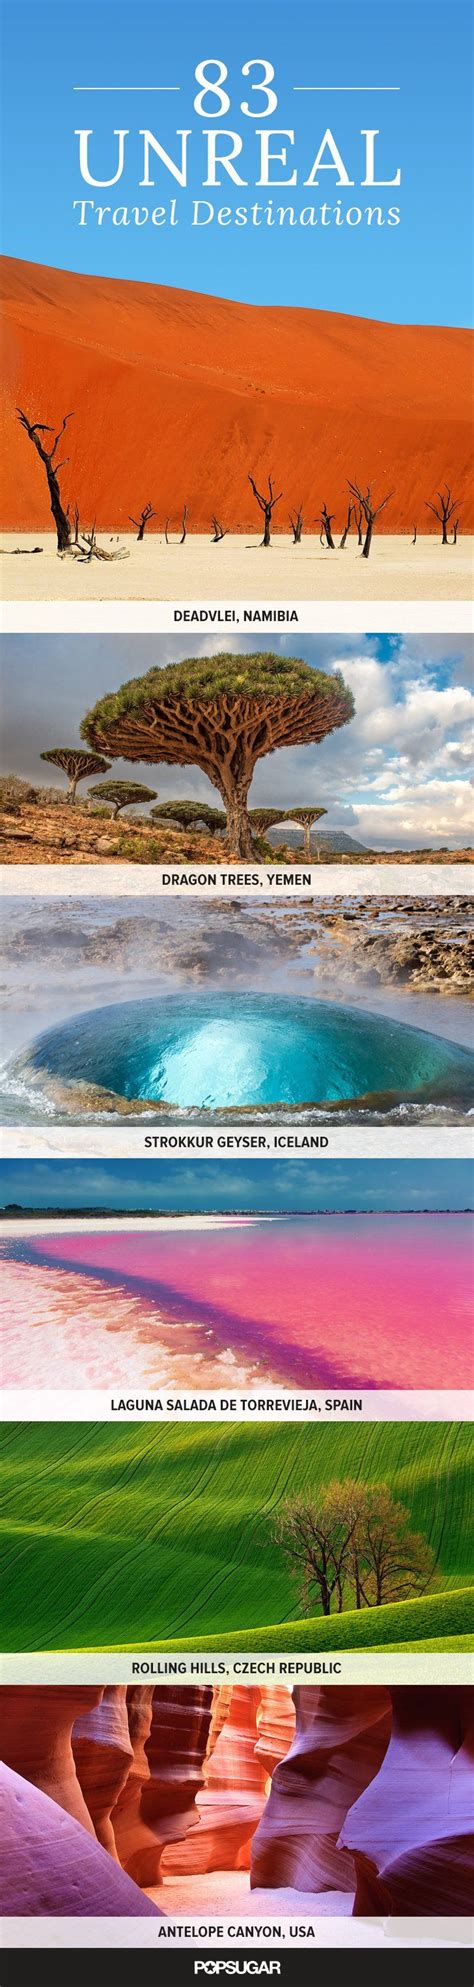 83 unreal places you thought existed only in your